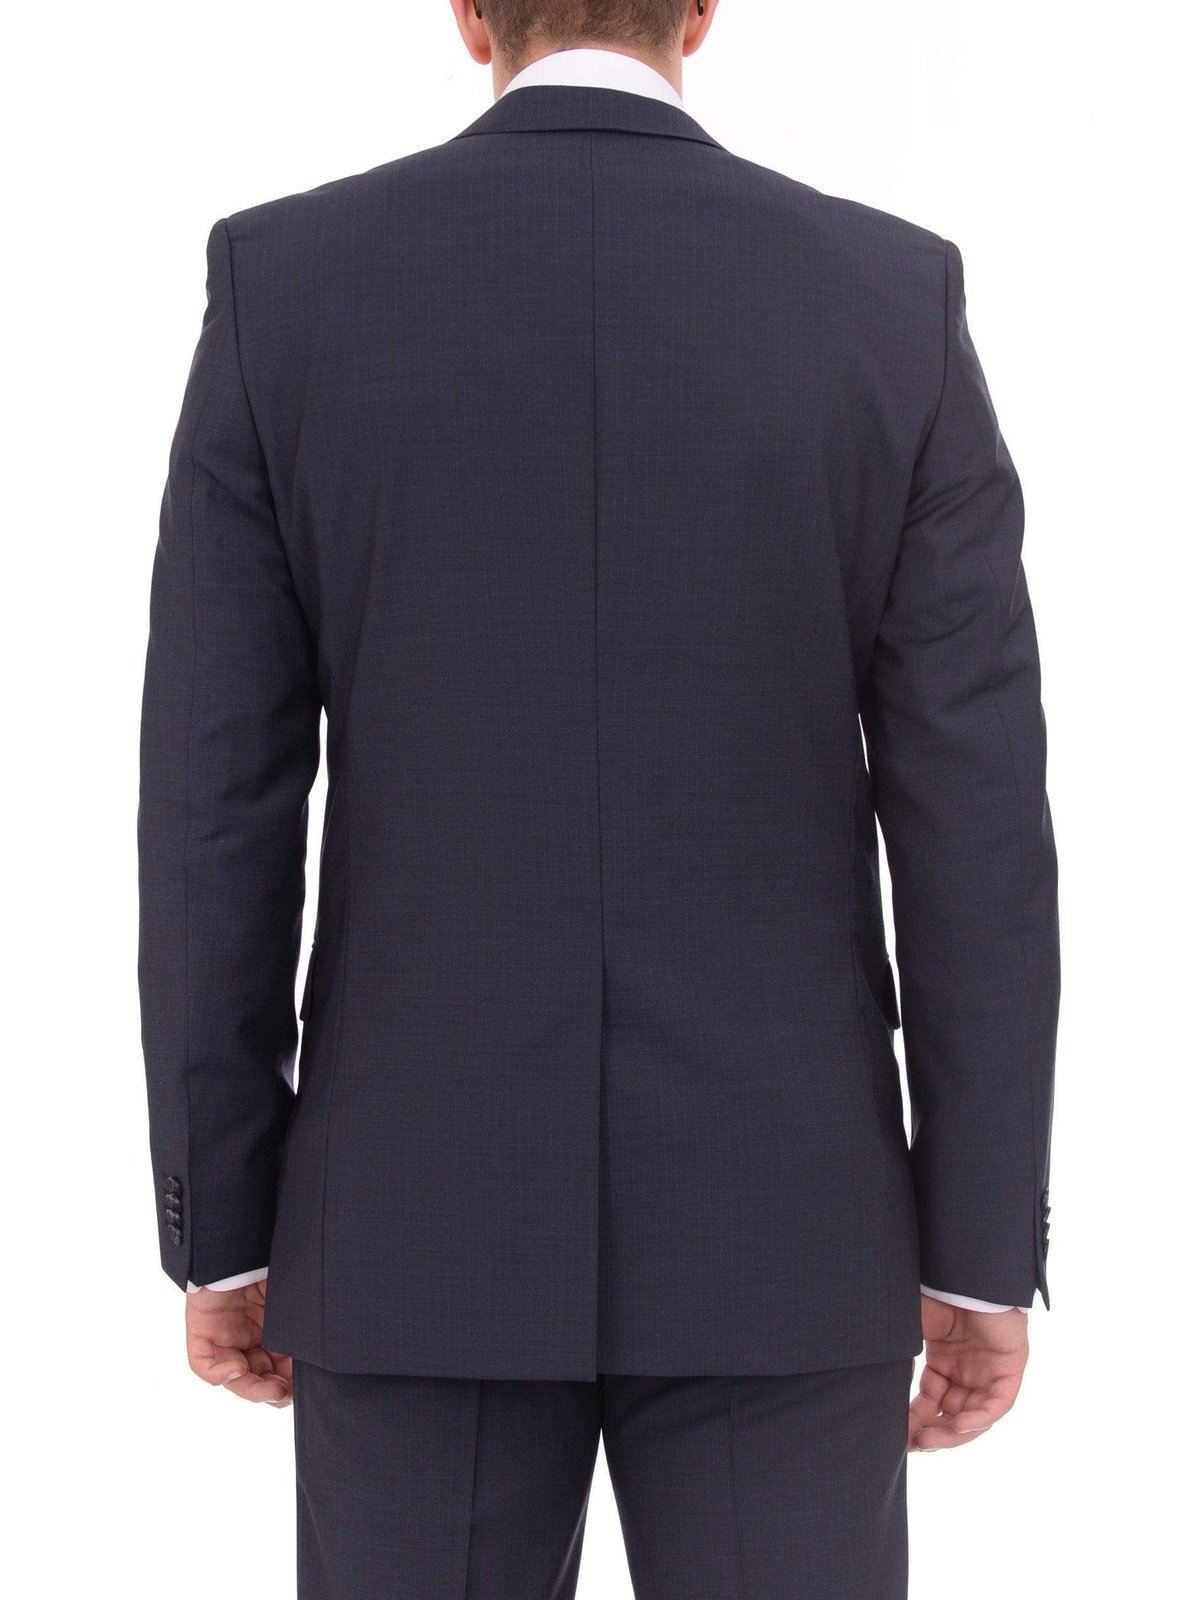 HUGO BOSS TWO PIECE SUITS Hugo Boss Aamon/hago Mens Slim Fit Navy Blue Textured Two Button Wool Suit